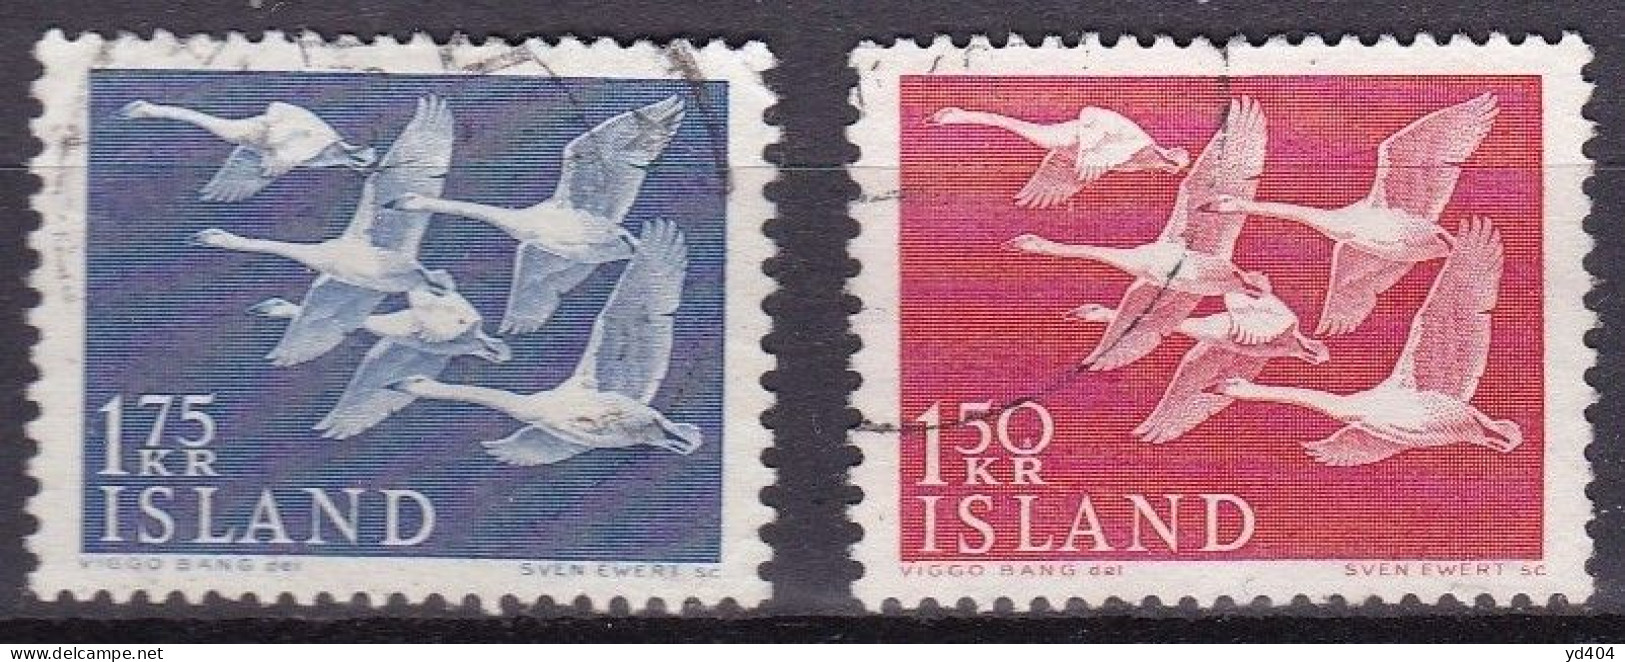 IS061 – ISLANDE – ICELAND – 1956 – NORTHEN COUNTRIES ISSUE – Y&T # 270/1 USED 15 € - Usati